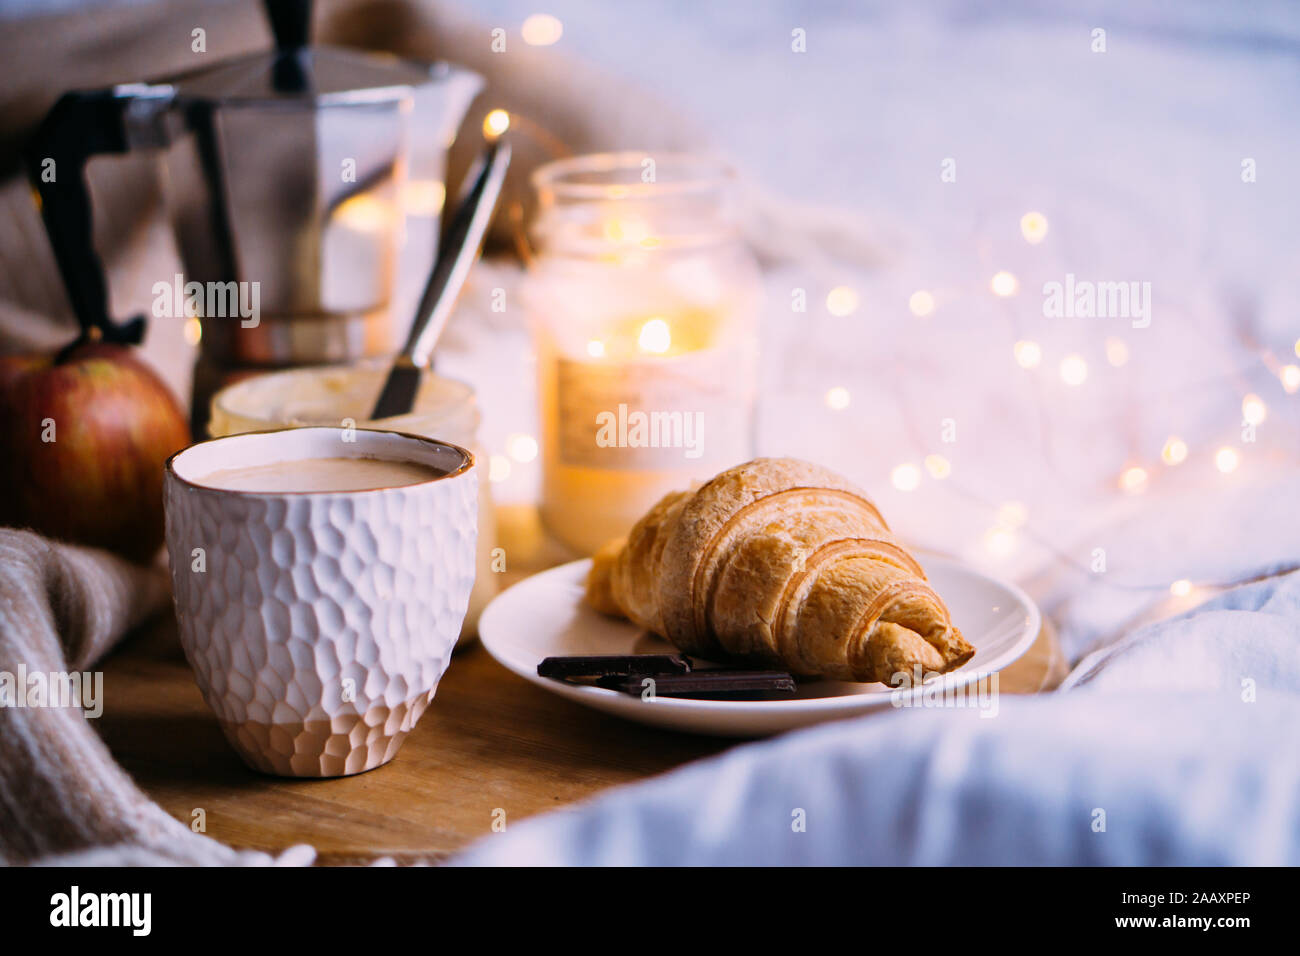 Outdoor Still Life Coffee Pot Cup Croissants Winter Make Coffee Stock Photo  by ©vjSniper 431486850